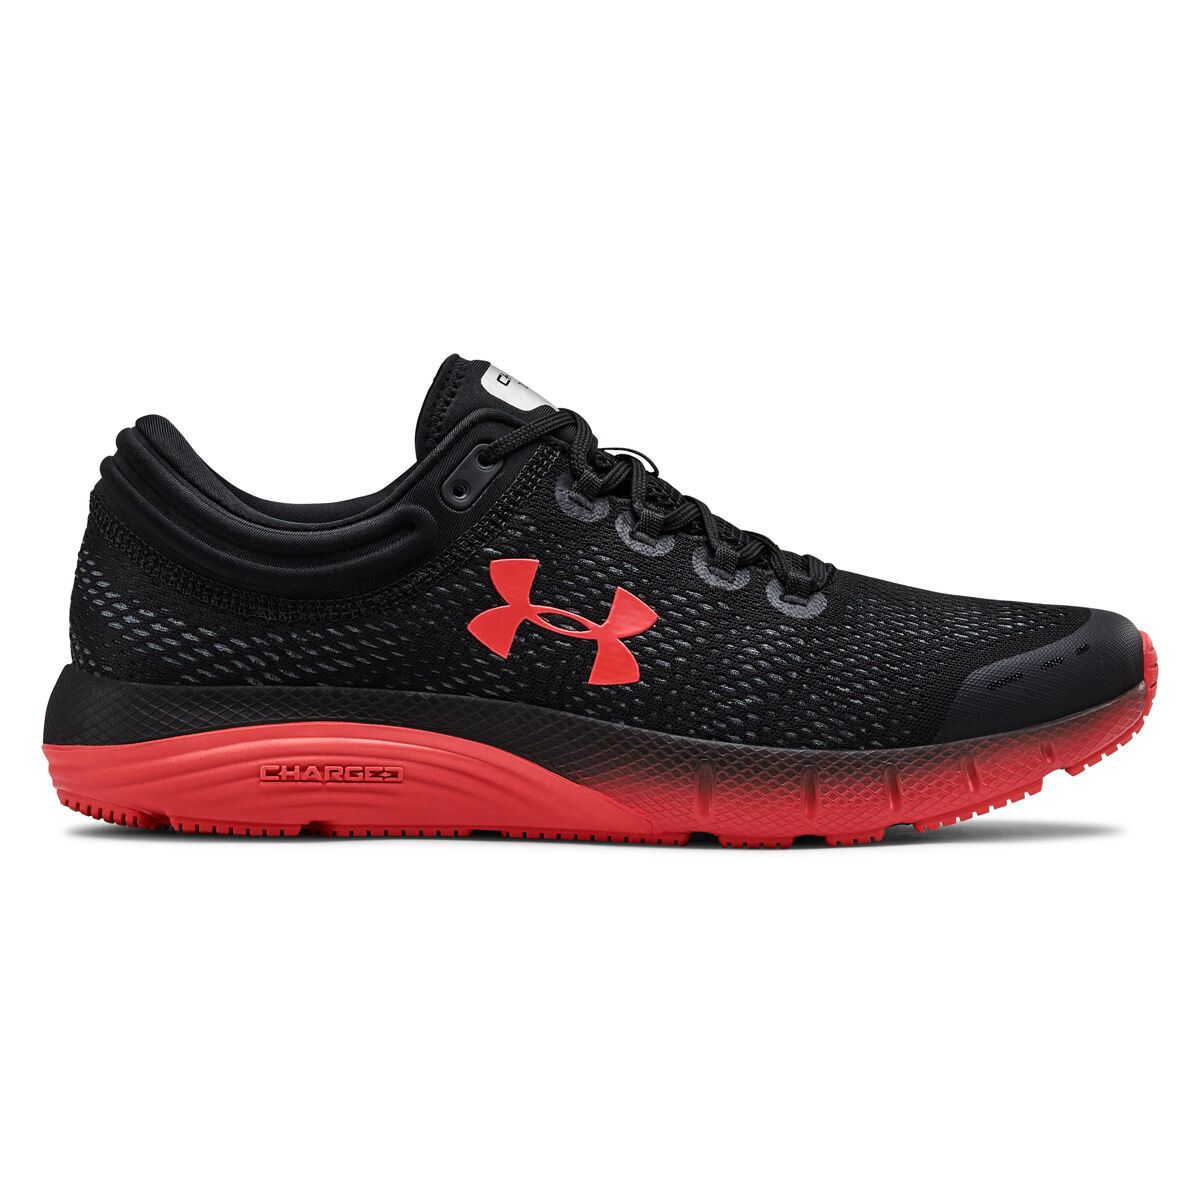 under armor charged shoe